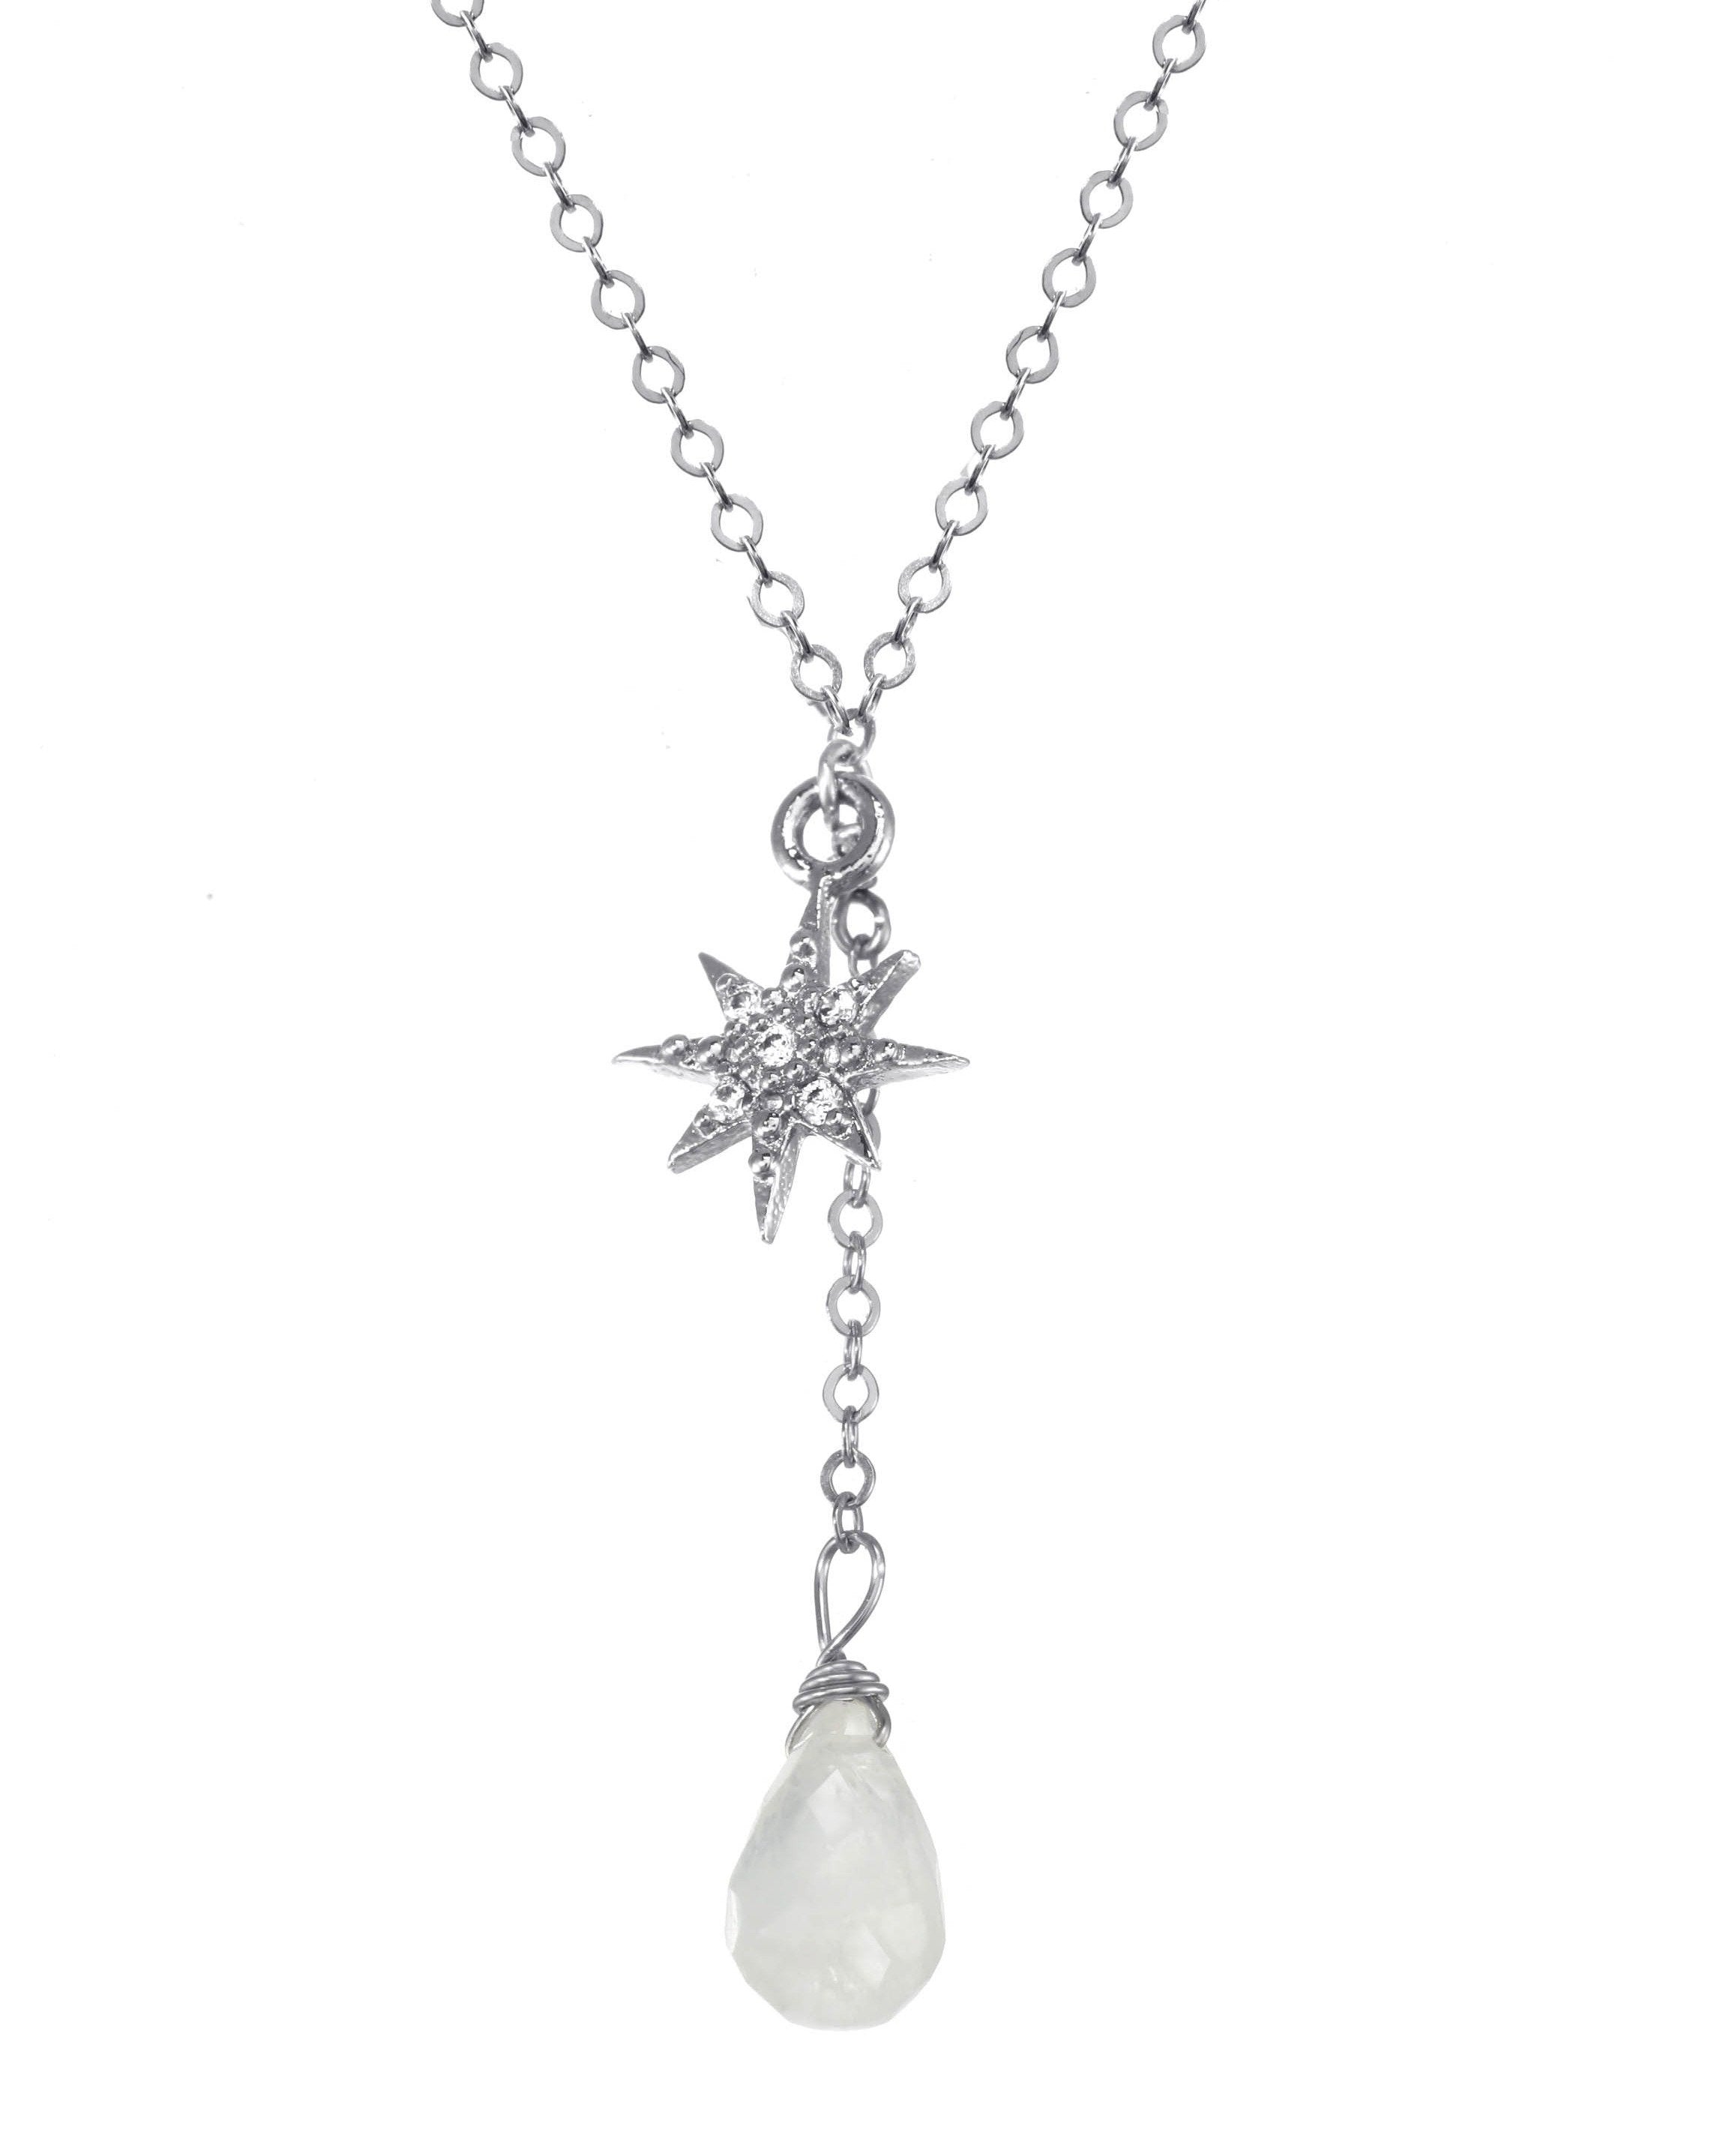 Corvus Necklace by KOZAKH. A 16 to 18 inch adjustable length, lariat style necklace in Sterling Silver, featuring a faceted Moonstone droplet and a Cubic Zirconia 8 point star charm.